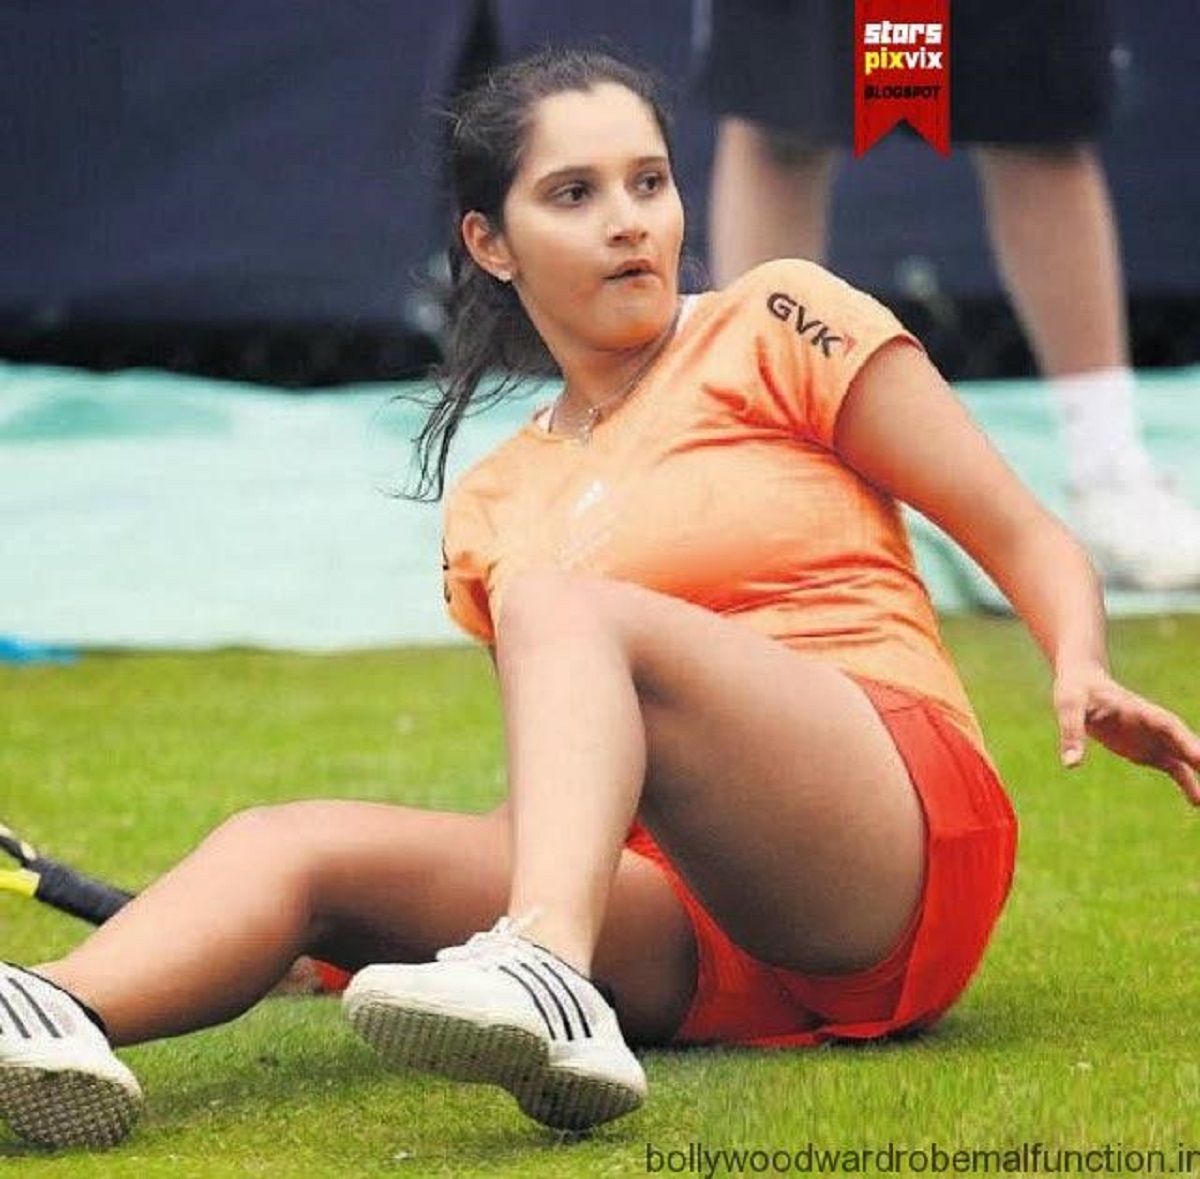 Sania Mirza Sexy Video Hd Bf - Sania Mirza Oops Moments On Tennis Court